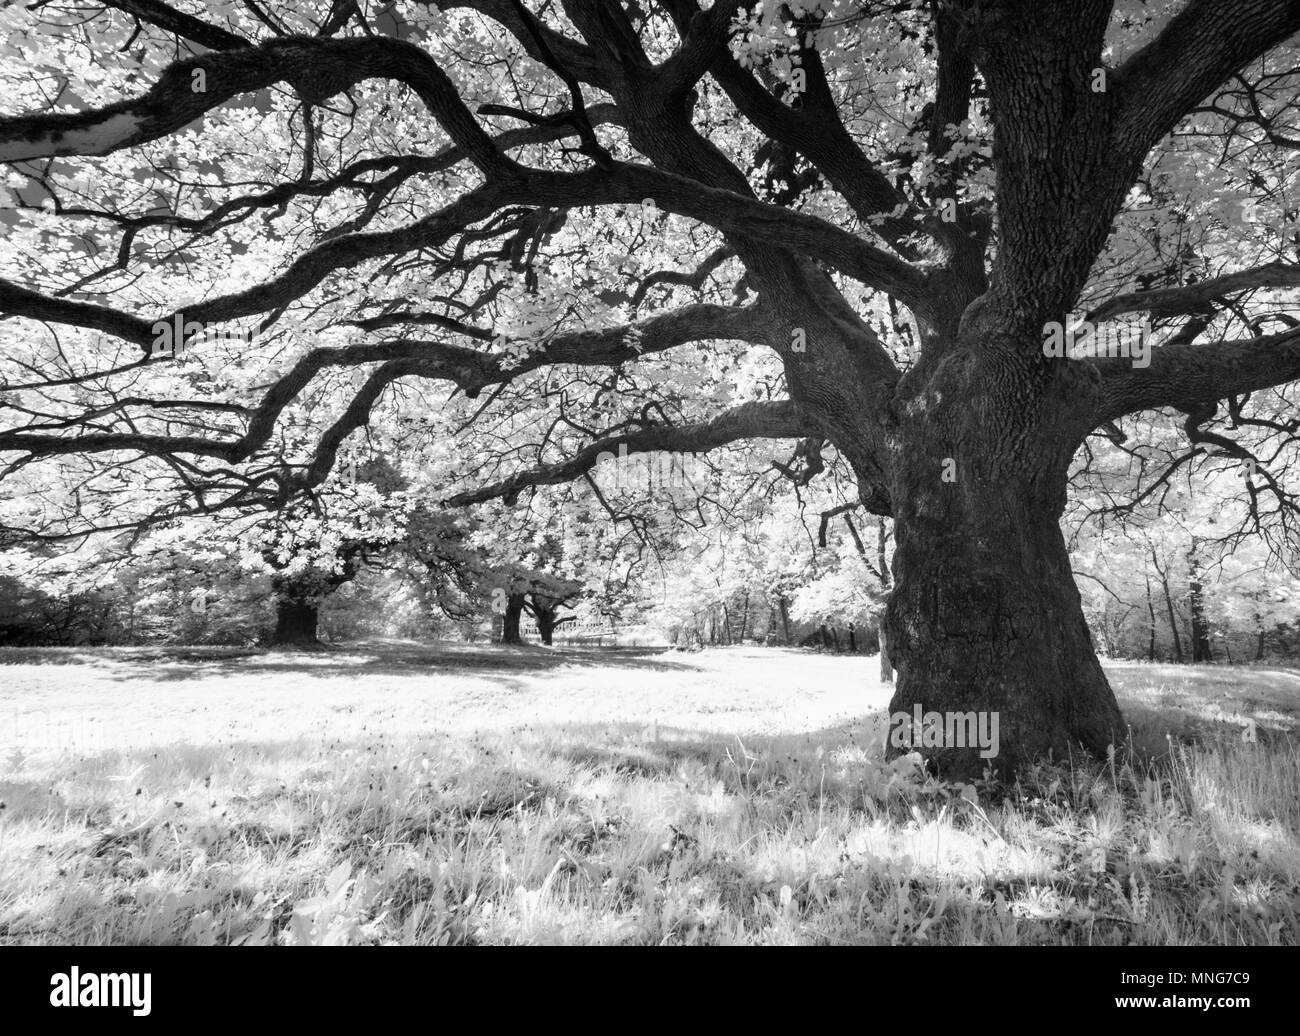 majestic old oak giving shade to a spring meadow in black and white Stock Photo